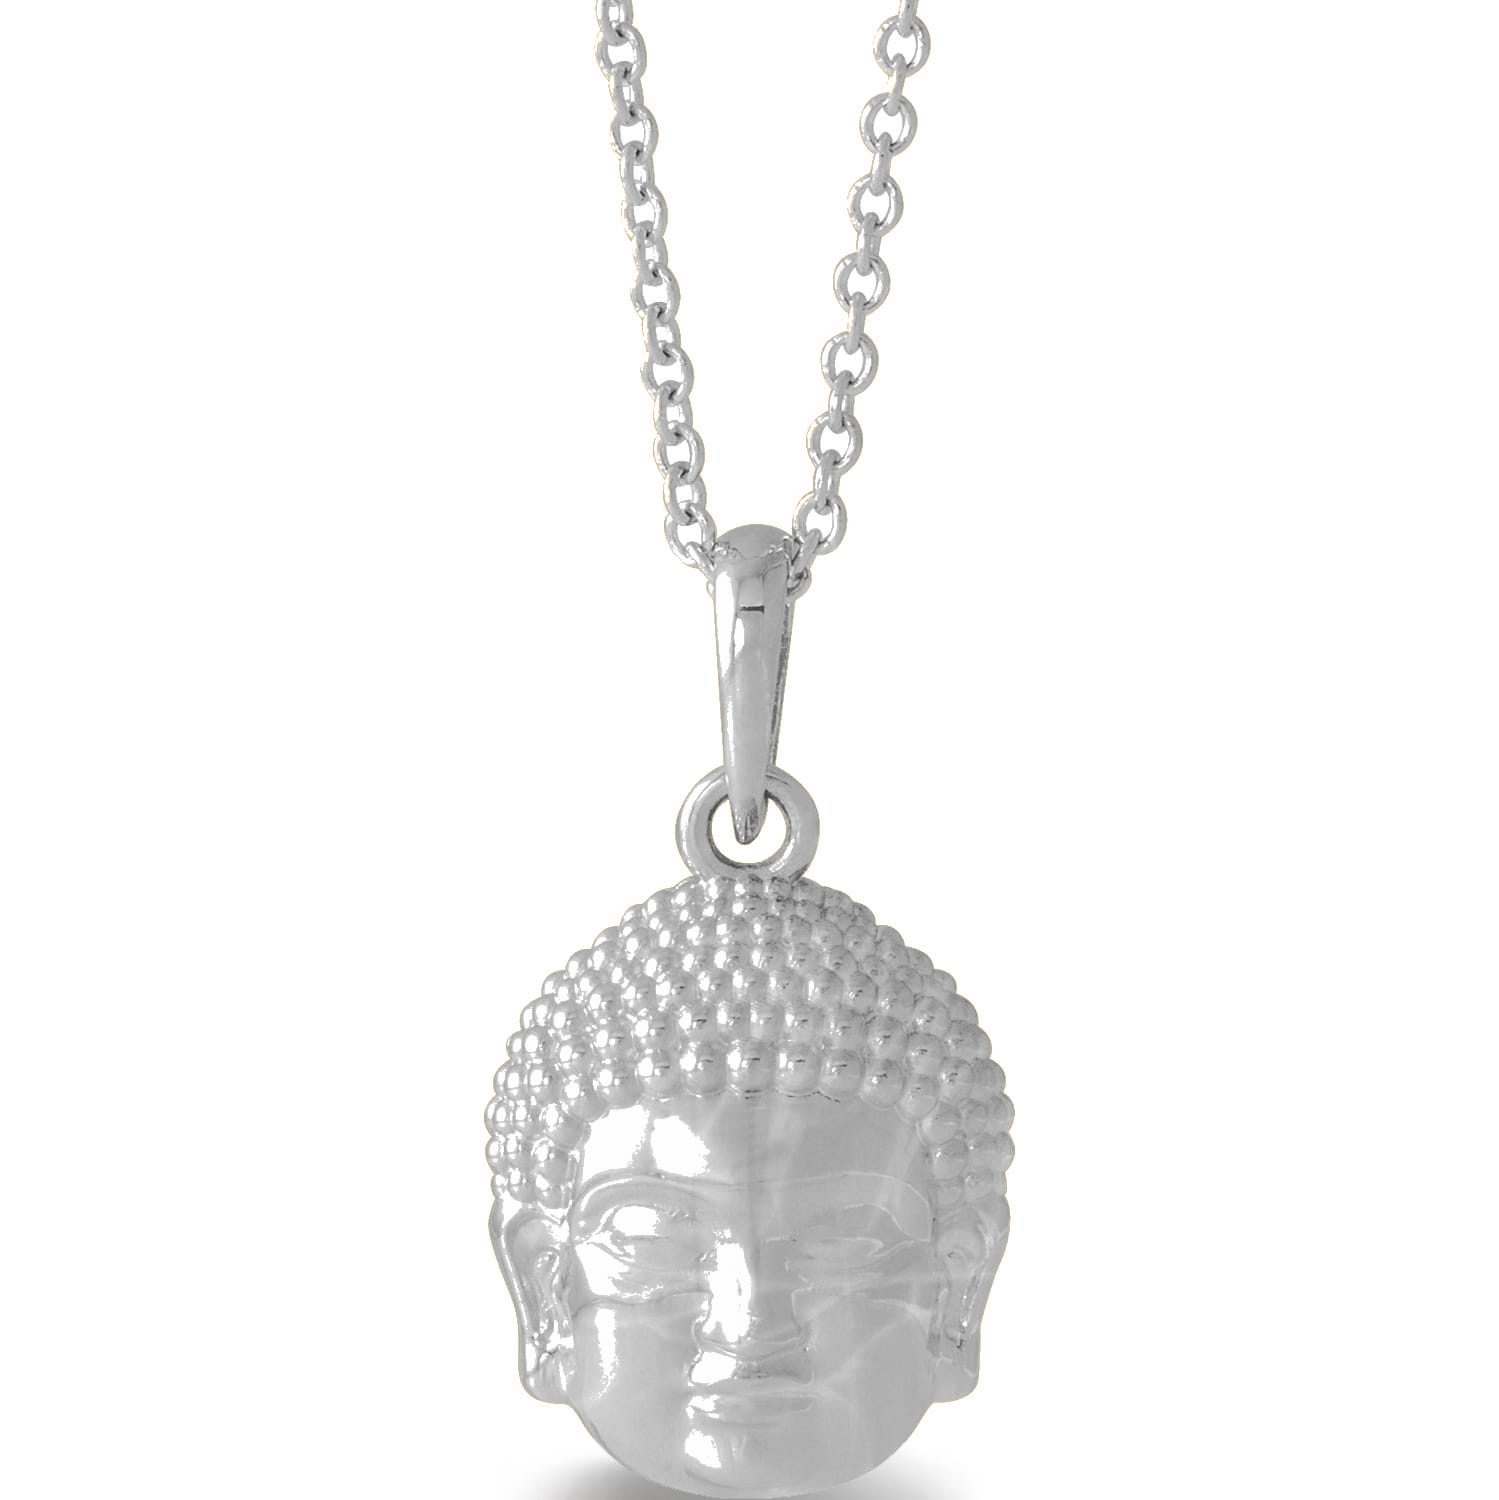 Buddha Head Pendant Necklace Sterling Silver